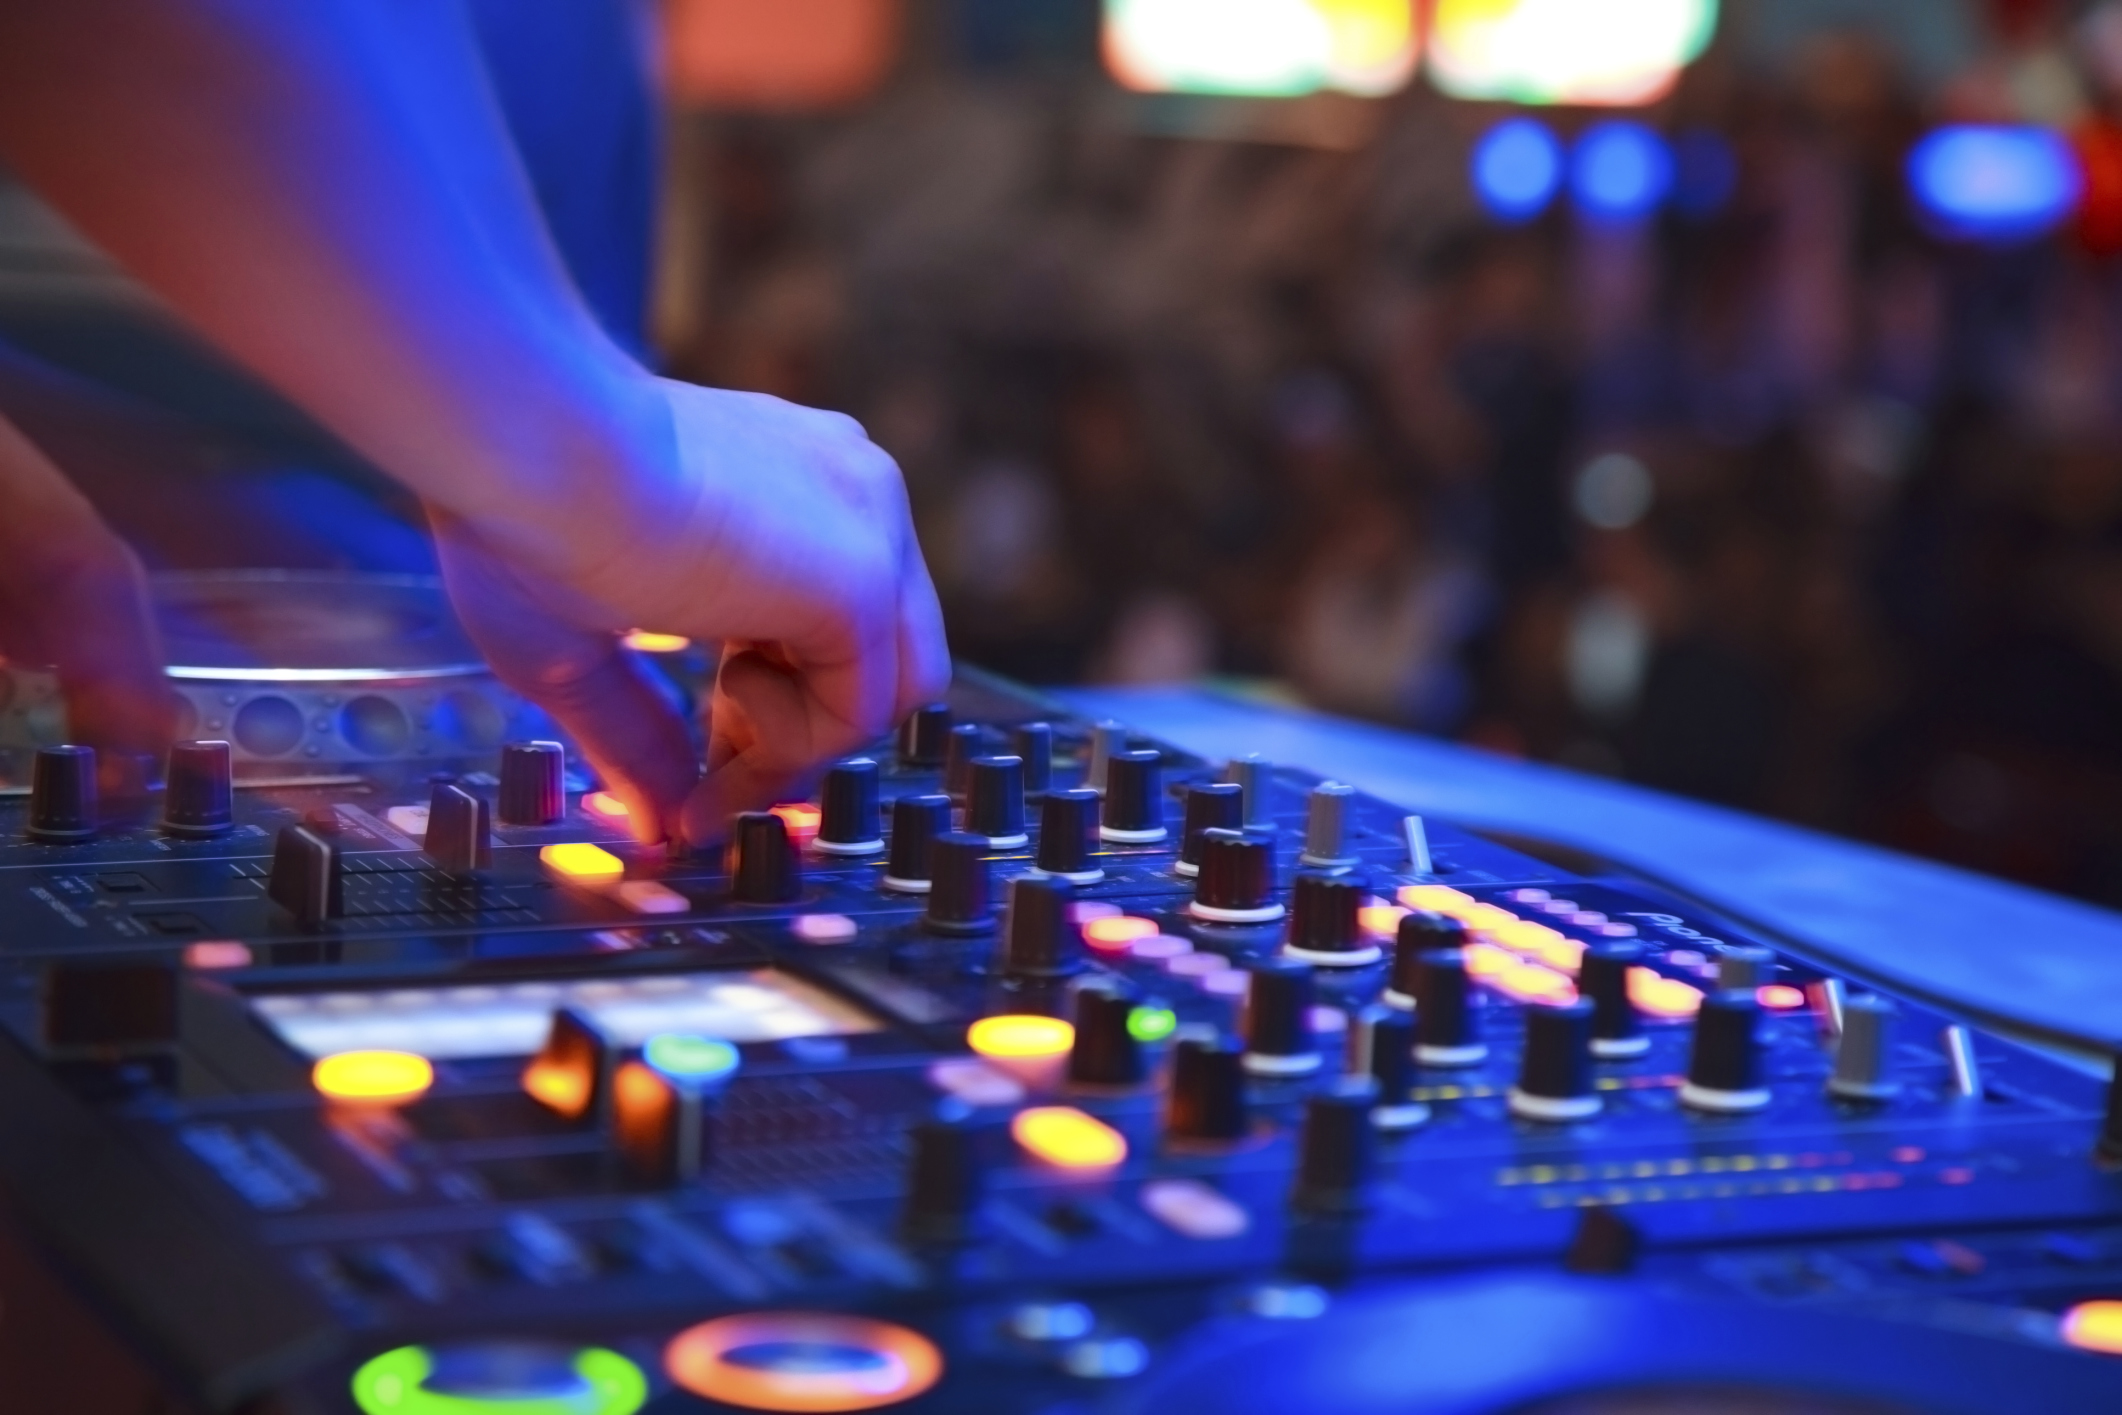 The DJ You Hire Could Make or Break Your Event